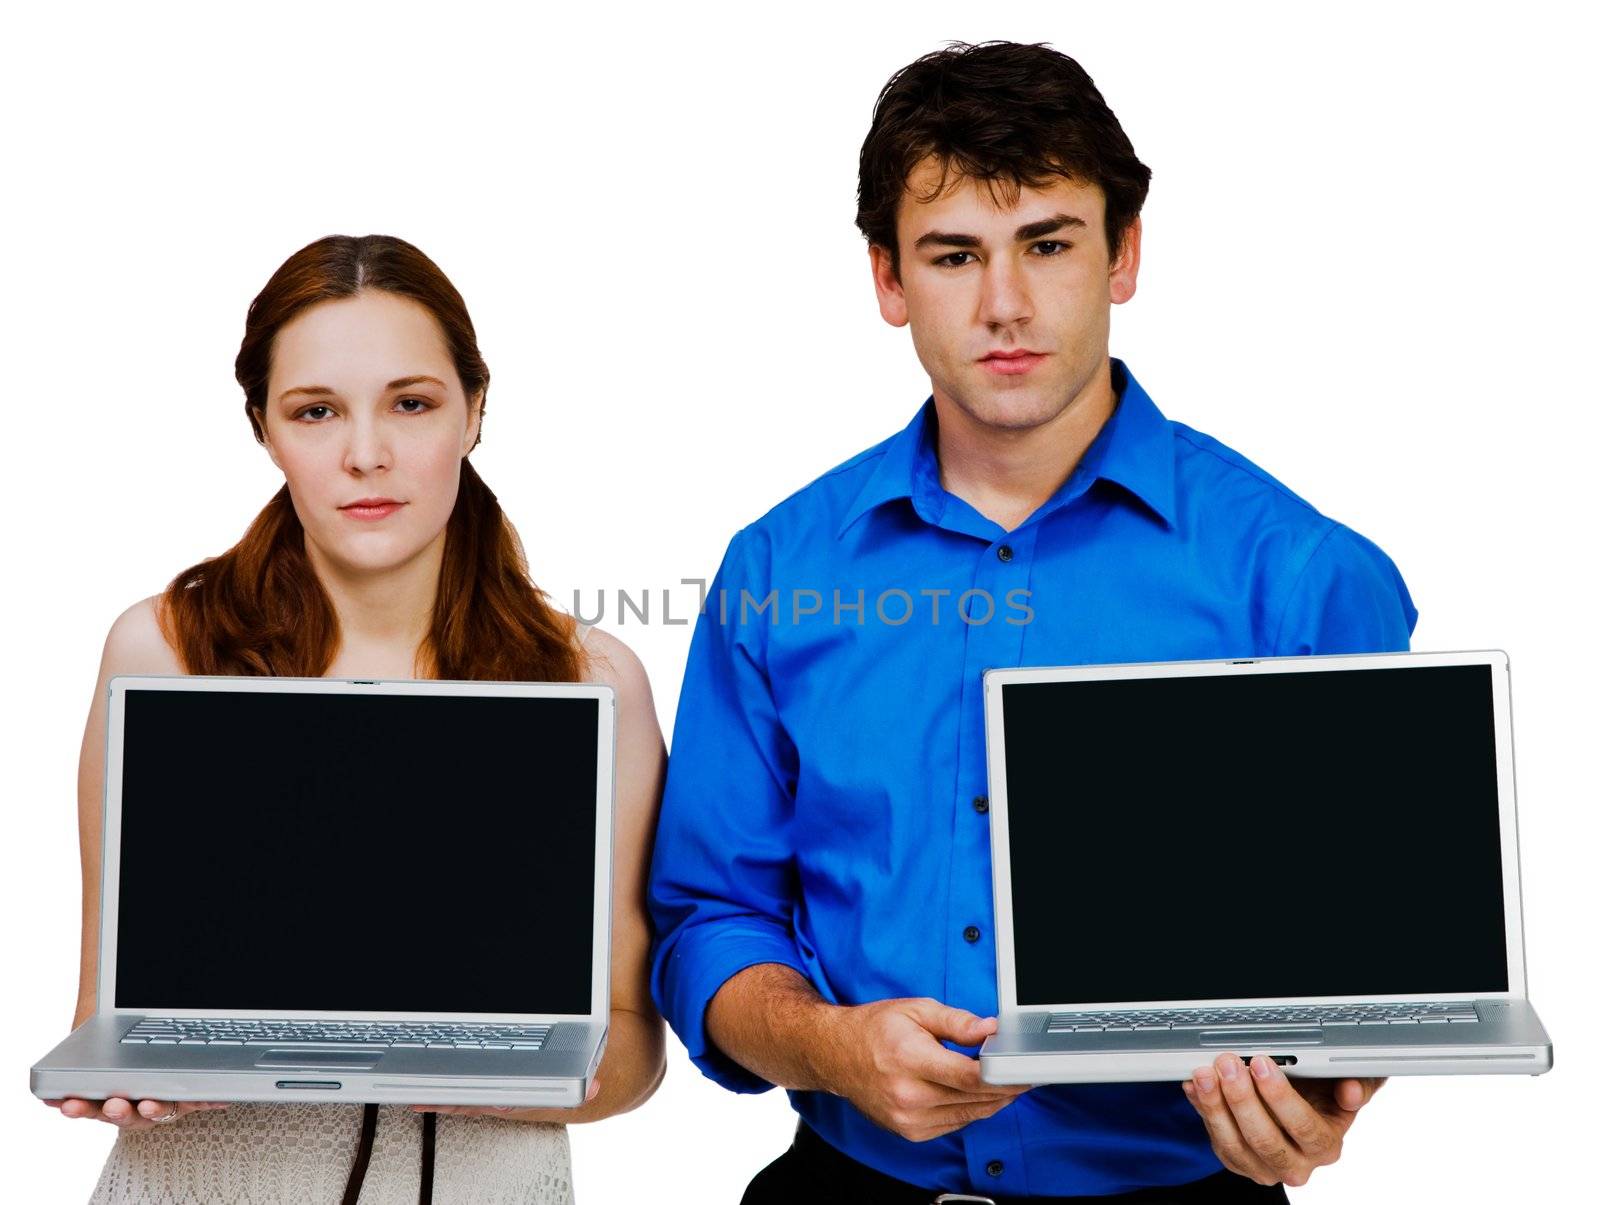 Man and woman showing laptops isolated over white